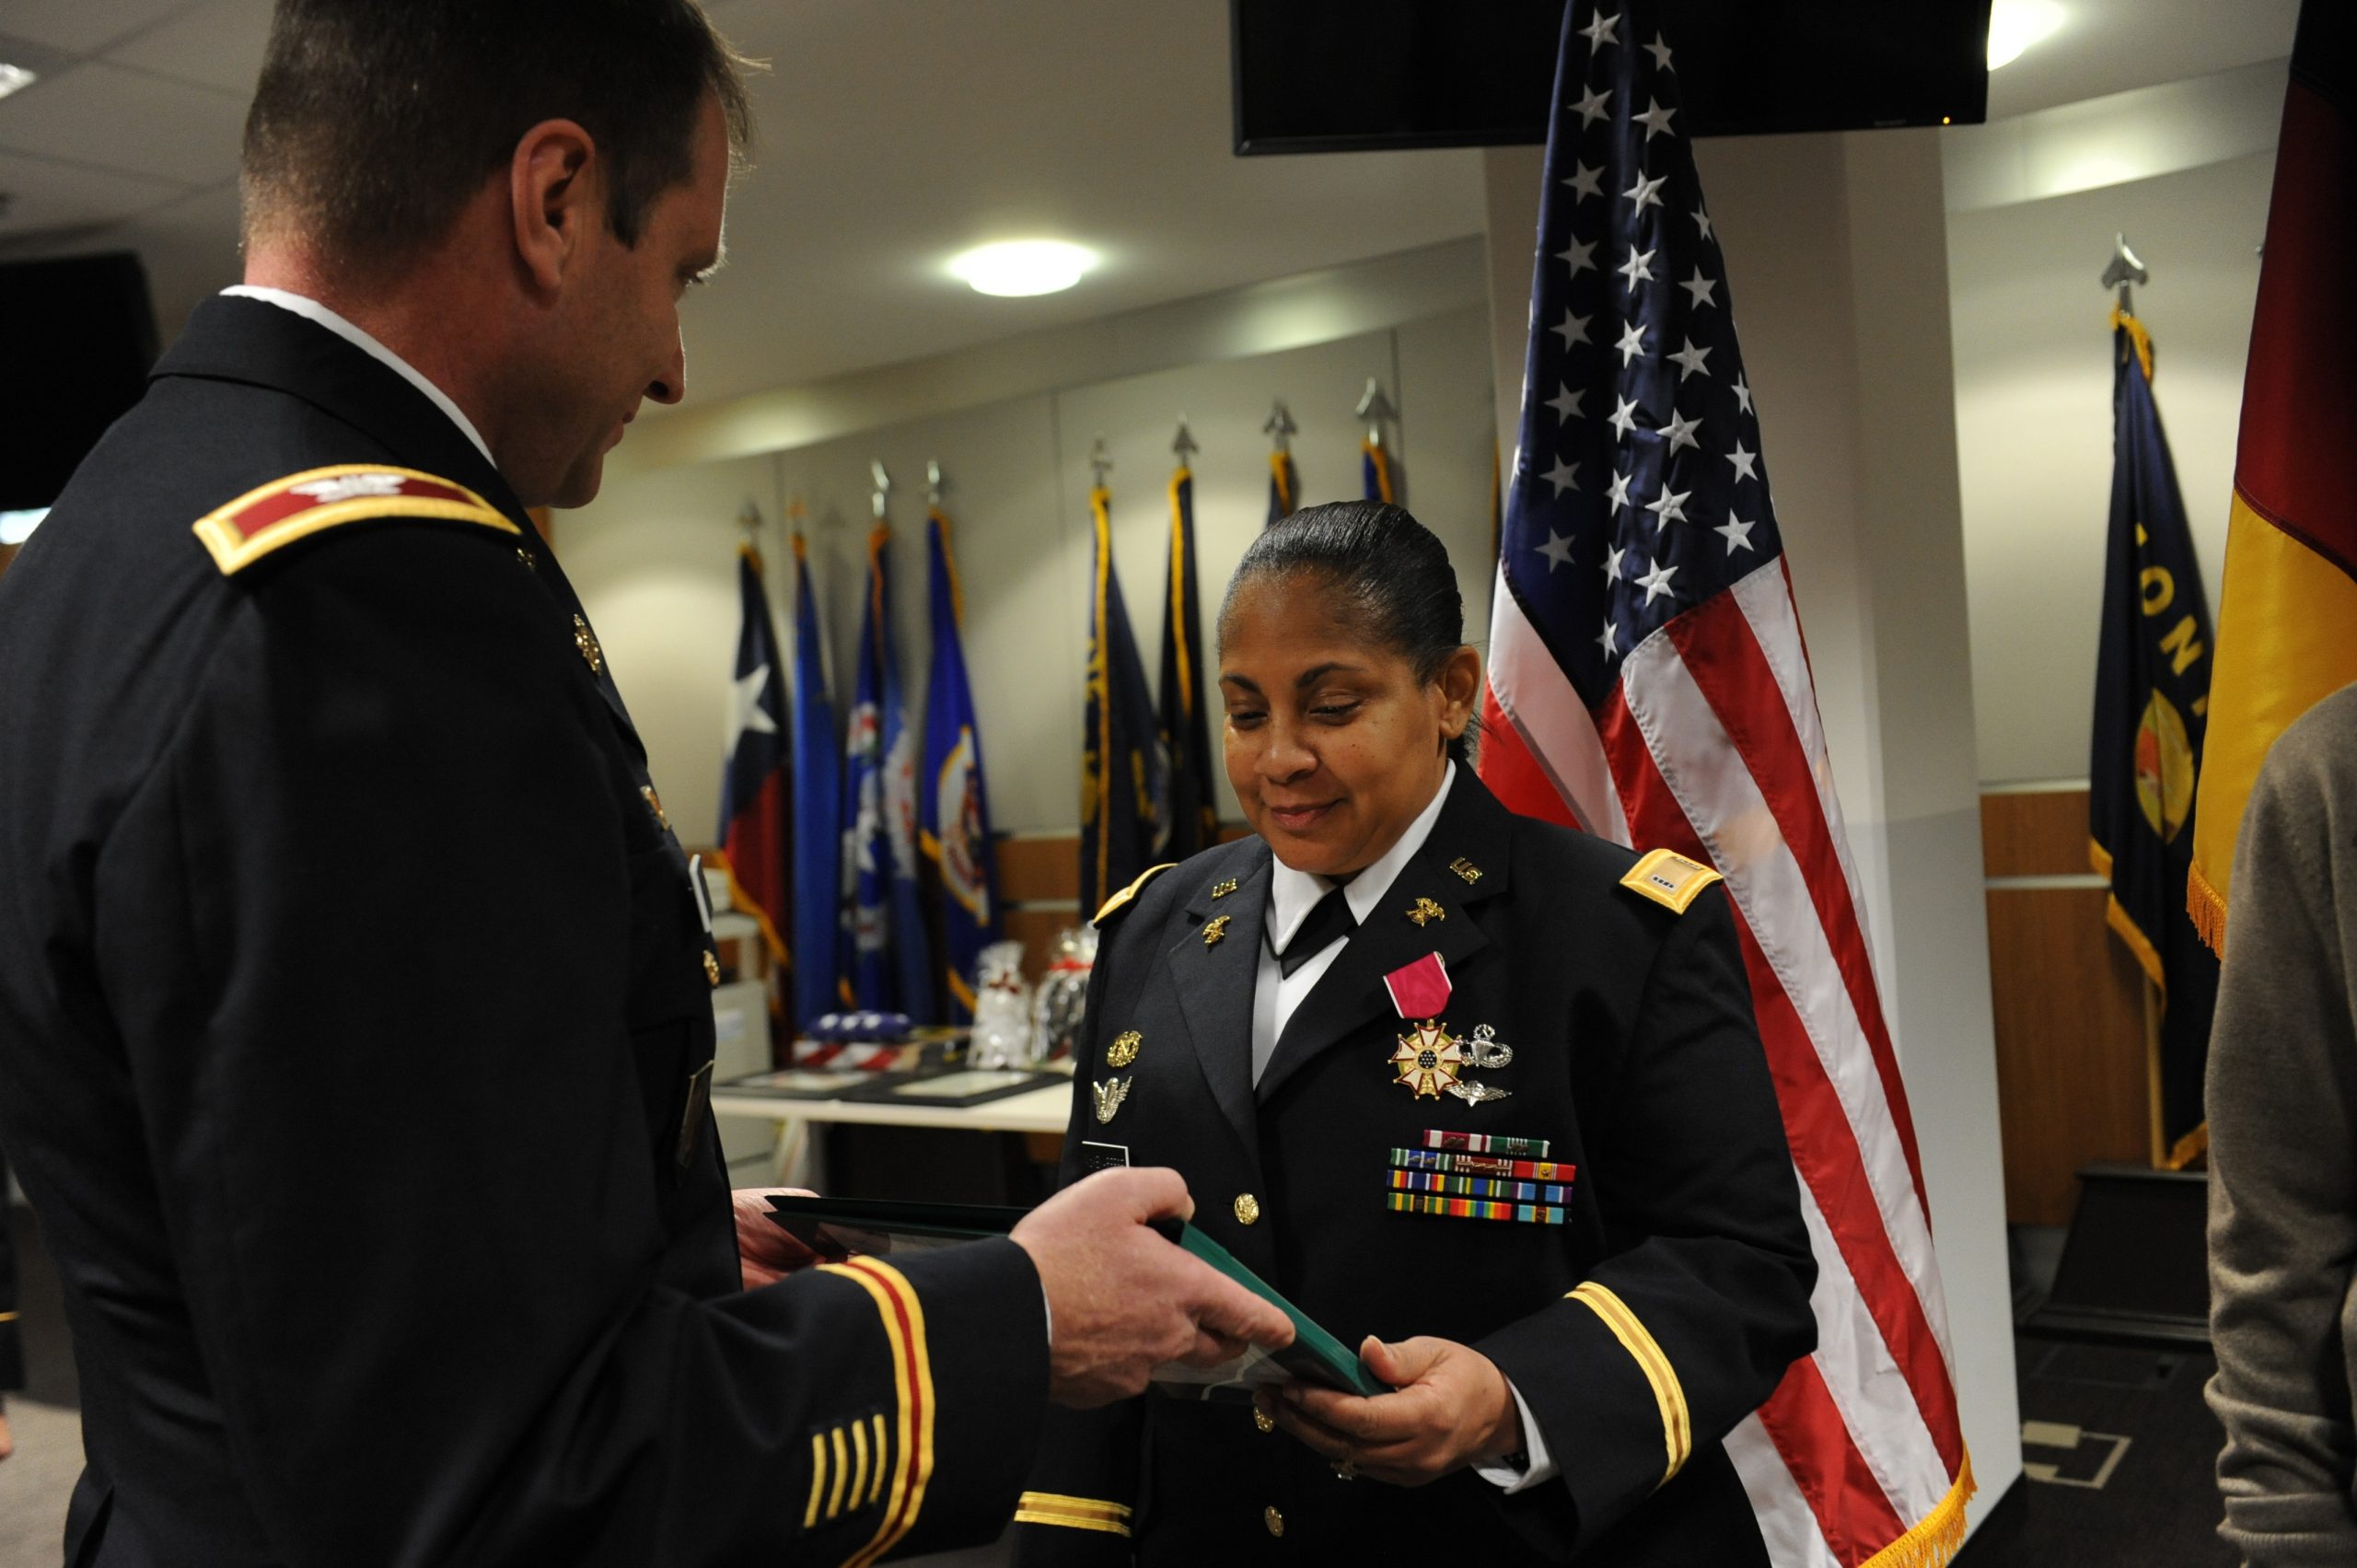 Chief Warrant Officer 4 Petrice McKey-Reese